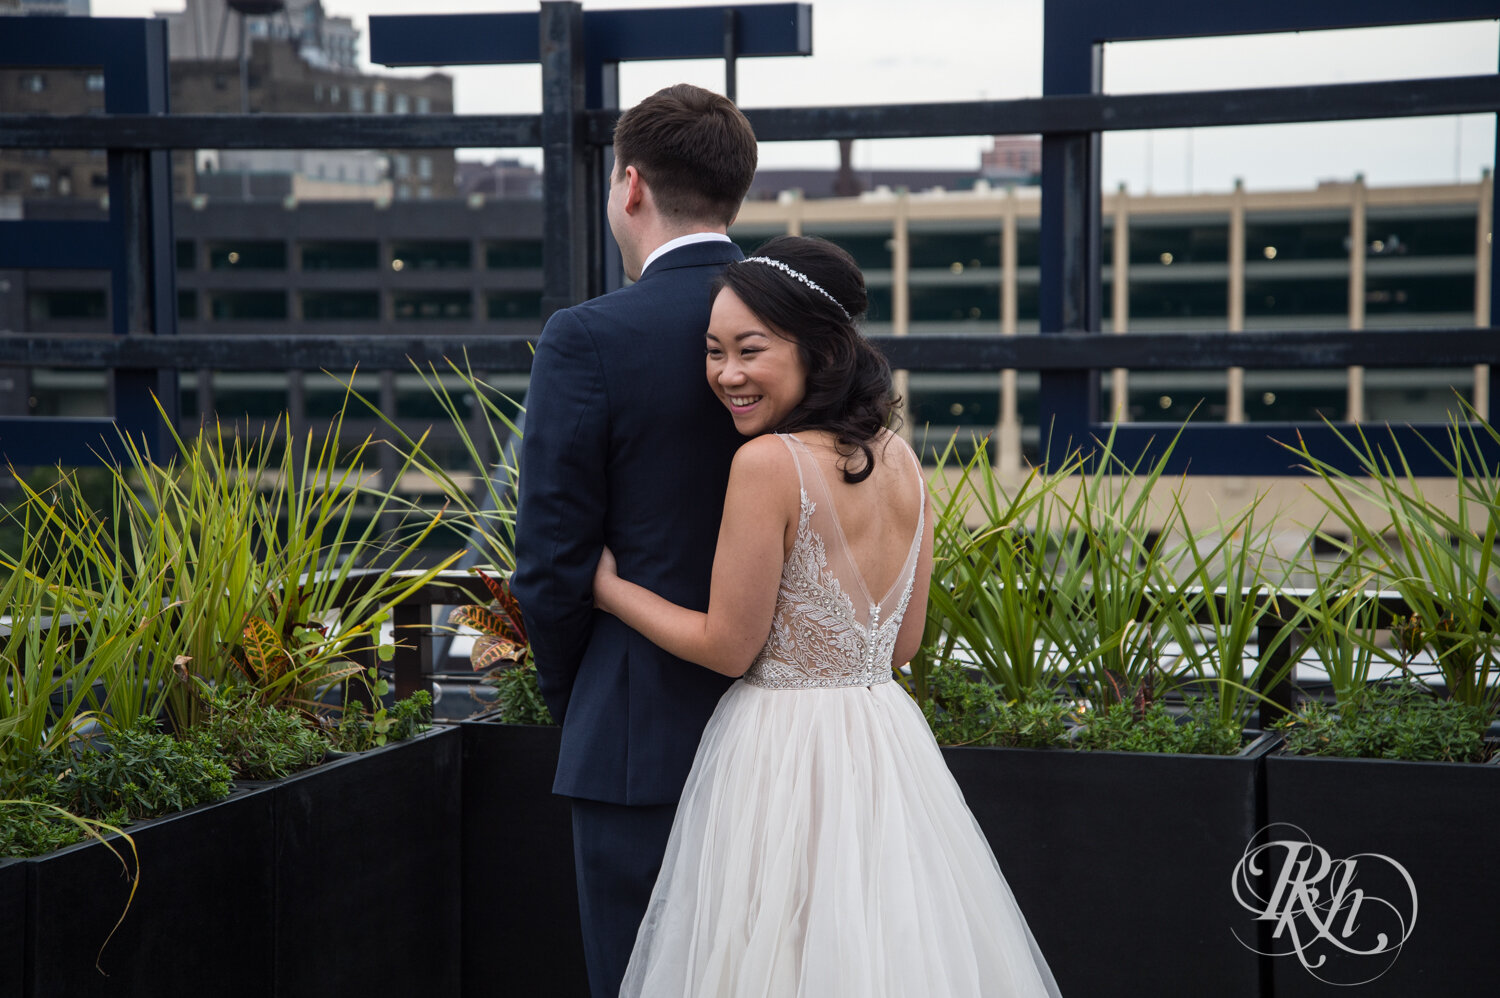 Asian bride and groom share first look on rooftop of the Hewing Hotel in Minneapolis, Minnesota.